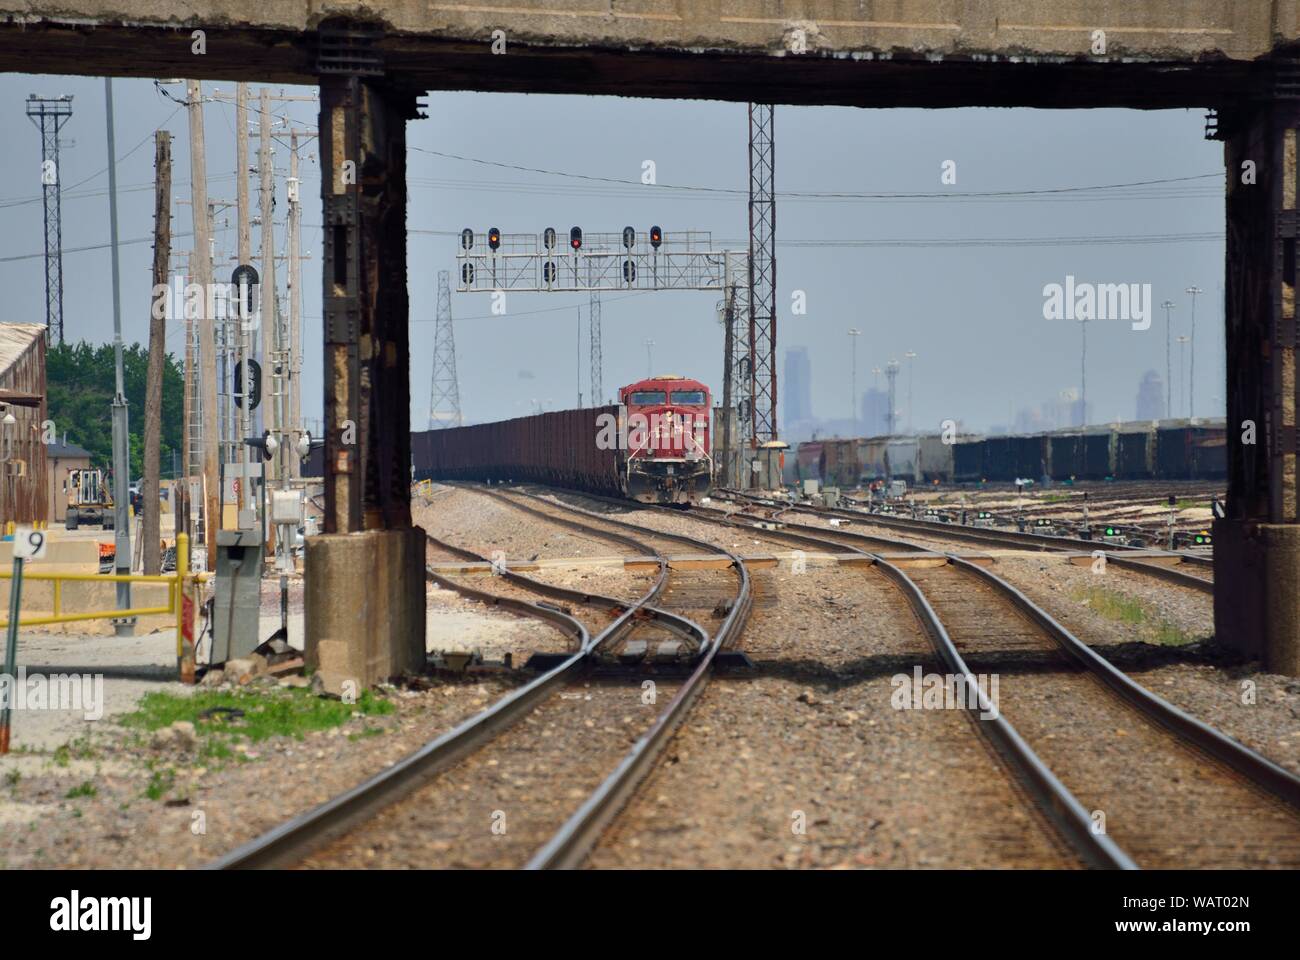 Railroad Yard High Resolution Stock Photography and Images - Alamy